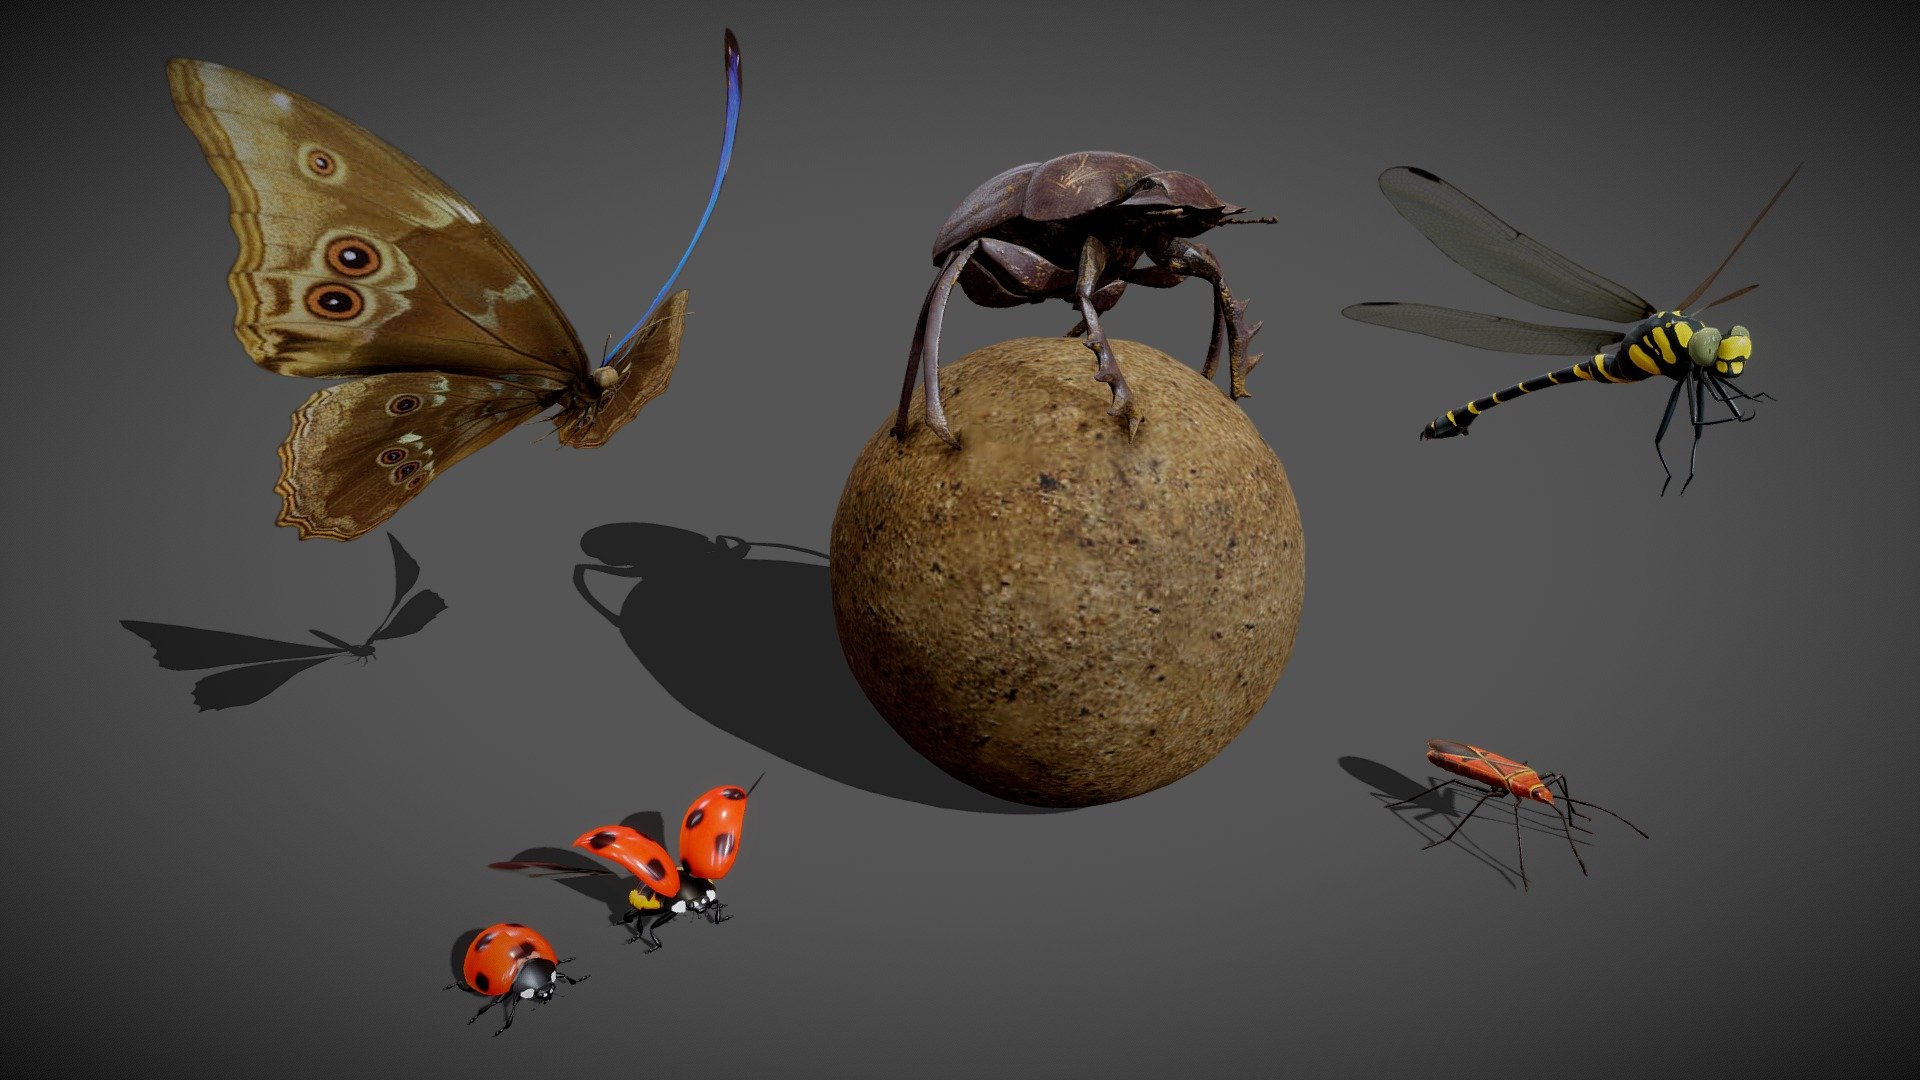 This pack contains 5 of my animated insect animals. Each model is in a fbx file format with 2048px (2K) sized textures.
with **15% ** discount

Contains 5 animated models (also available individually, link below 👇)




Butterfly (5 animations =&gt; fly, walk, take off and land + 10 wings colors)

Ladybug (4  animations =&gt; fly, walk, take off and land)

Dung beetle (6 animations =&gt; walk, idle and 4 transition)

Dragonfly (5 animations =&gt; 2 fly, walk, take off and land)

Firebug (1 animations =&gt; walk)

Please download the additional files ( available in the dowload section ), to have access to the animated models and the 2048px sized textures.




If you have any questions, contact me.

 
 - Animated insect pack - Buy Royalty Free 3D model by Zacxophone 3d model